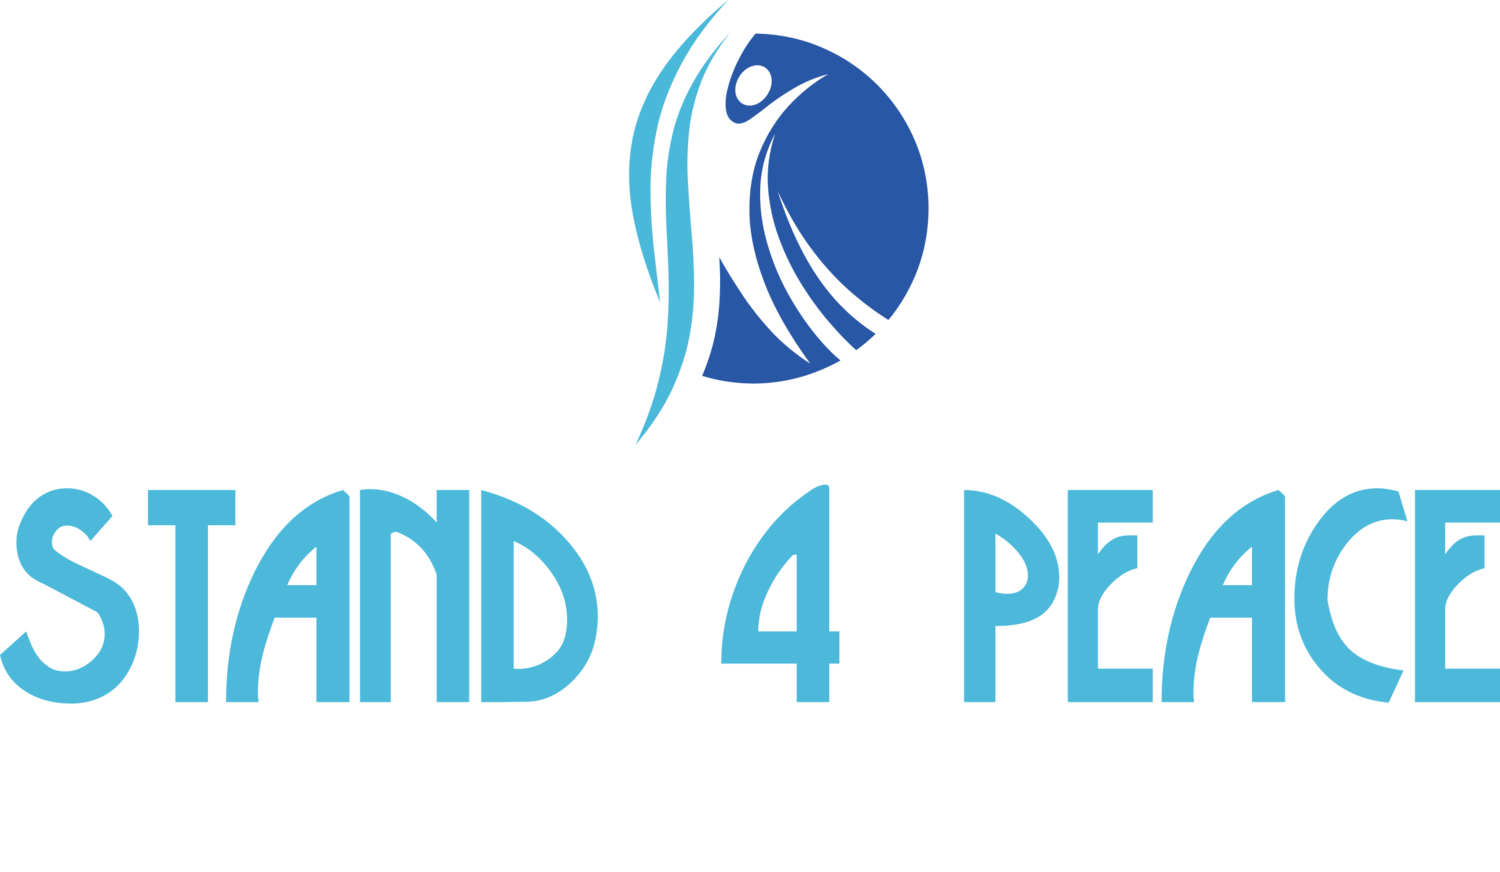 STAND  4  PEACE